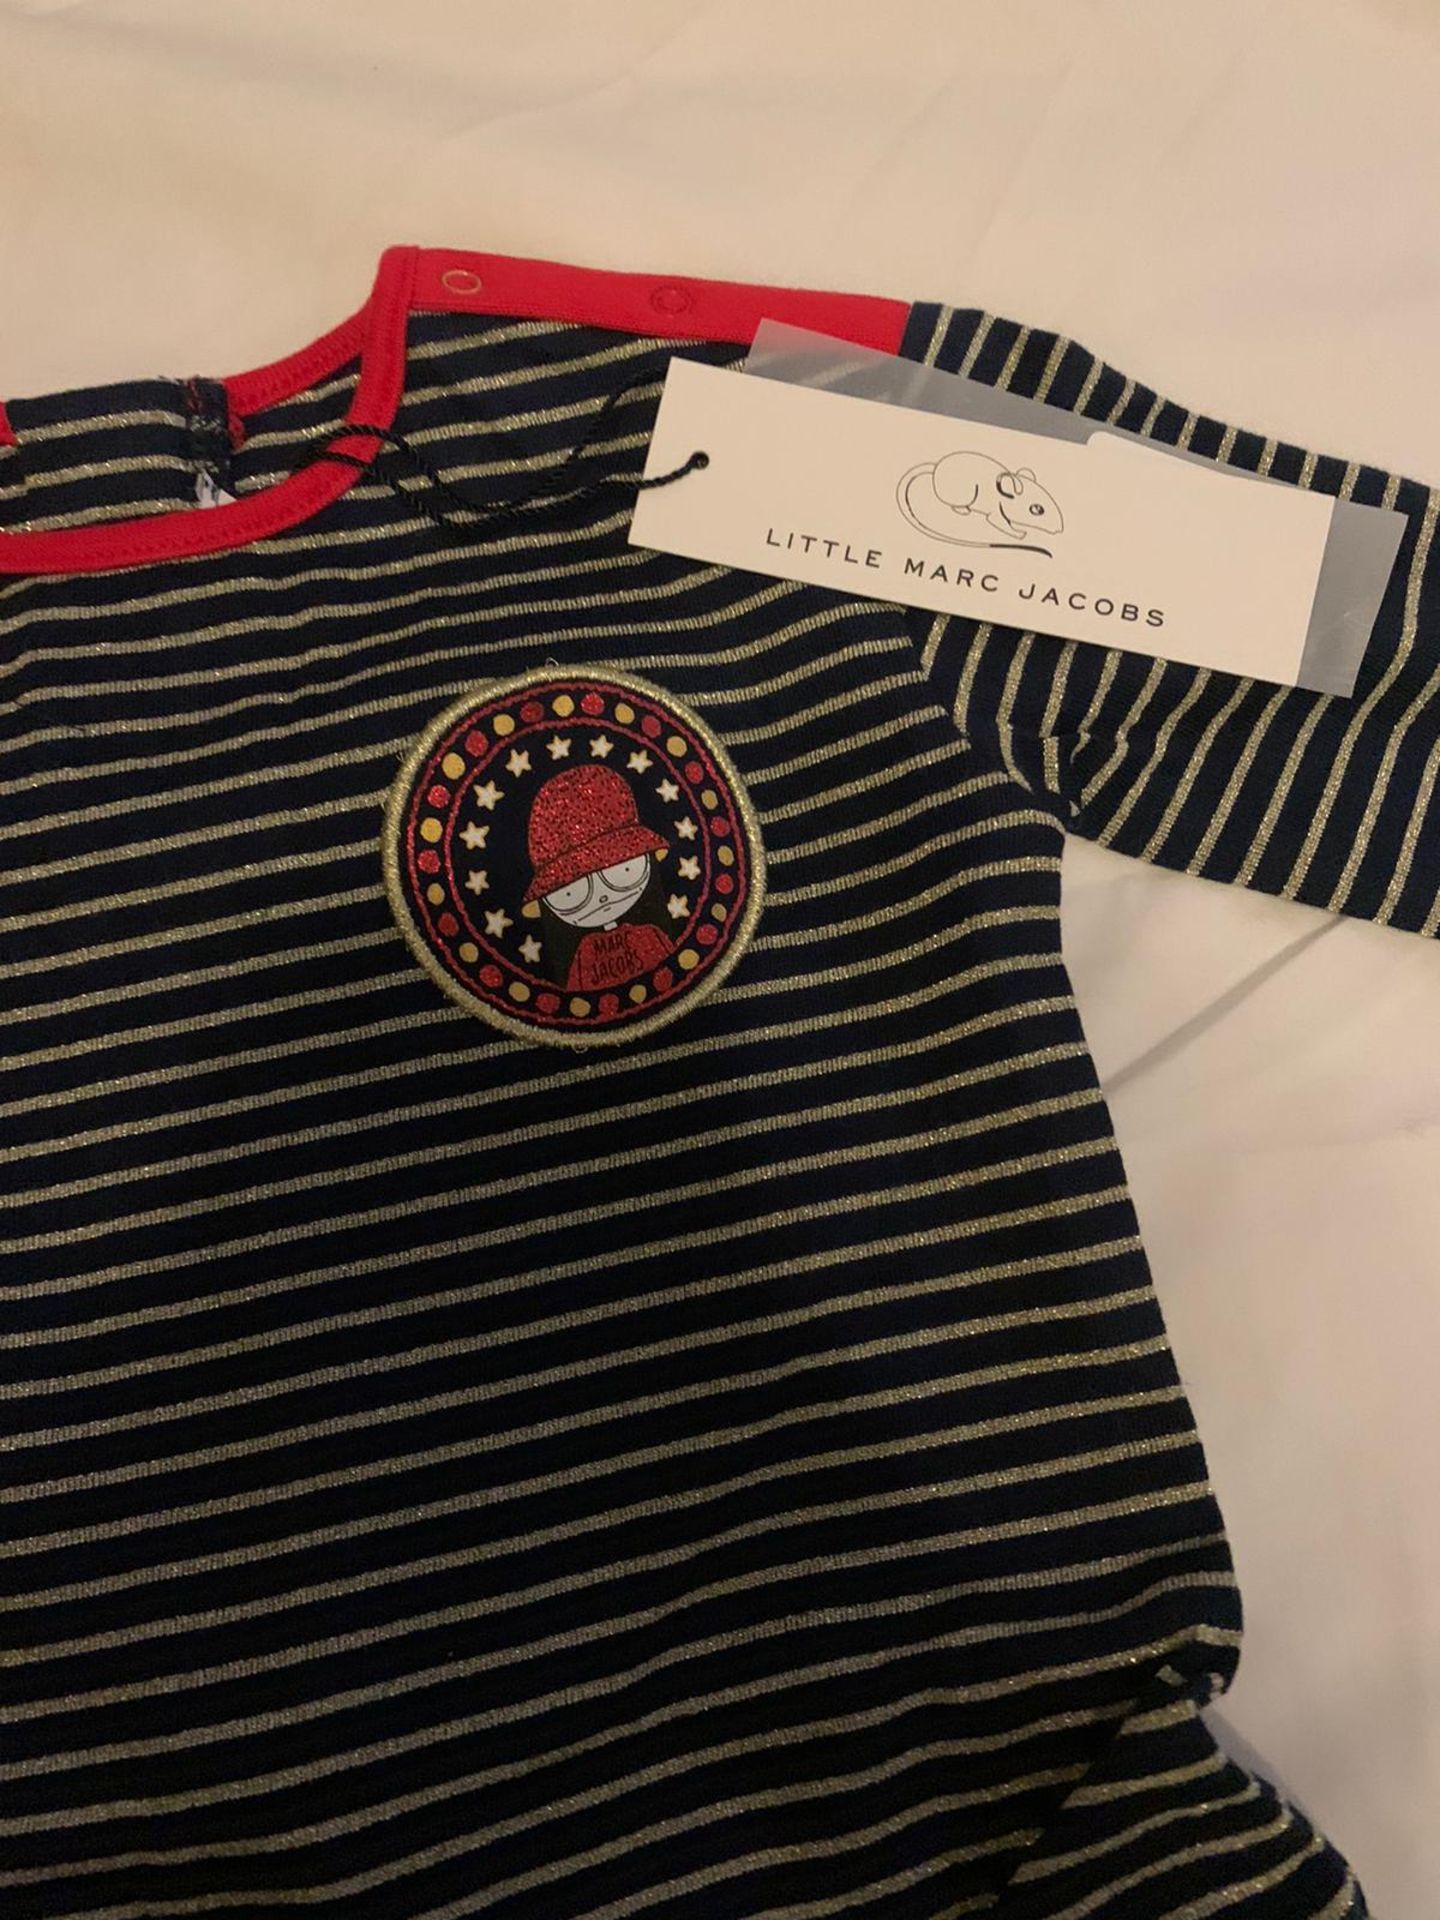 LITTLE MARC JACOBS BLUE STORE DRESS - AGE 18 MONTHS - Image 3 of 3